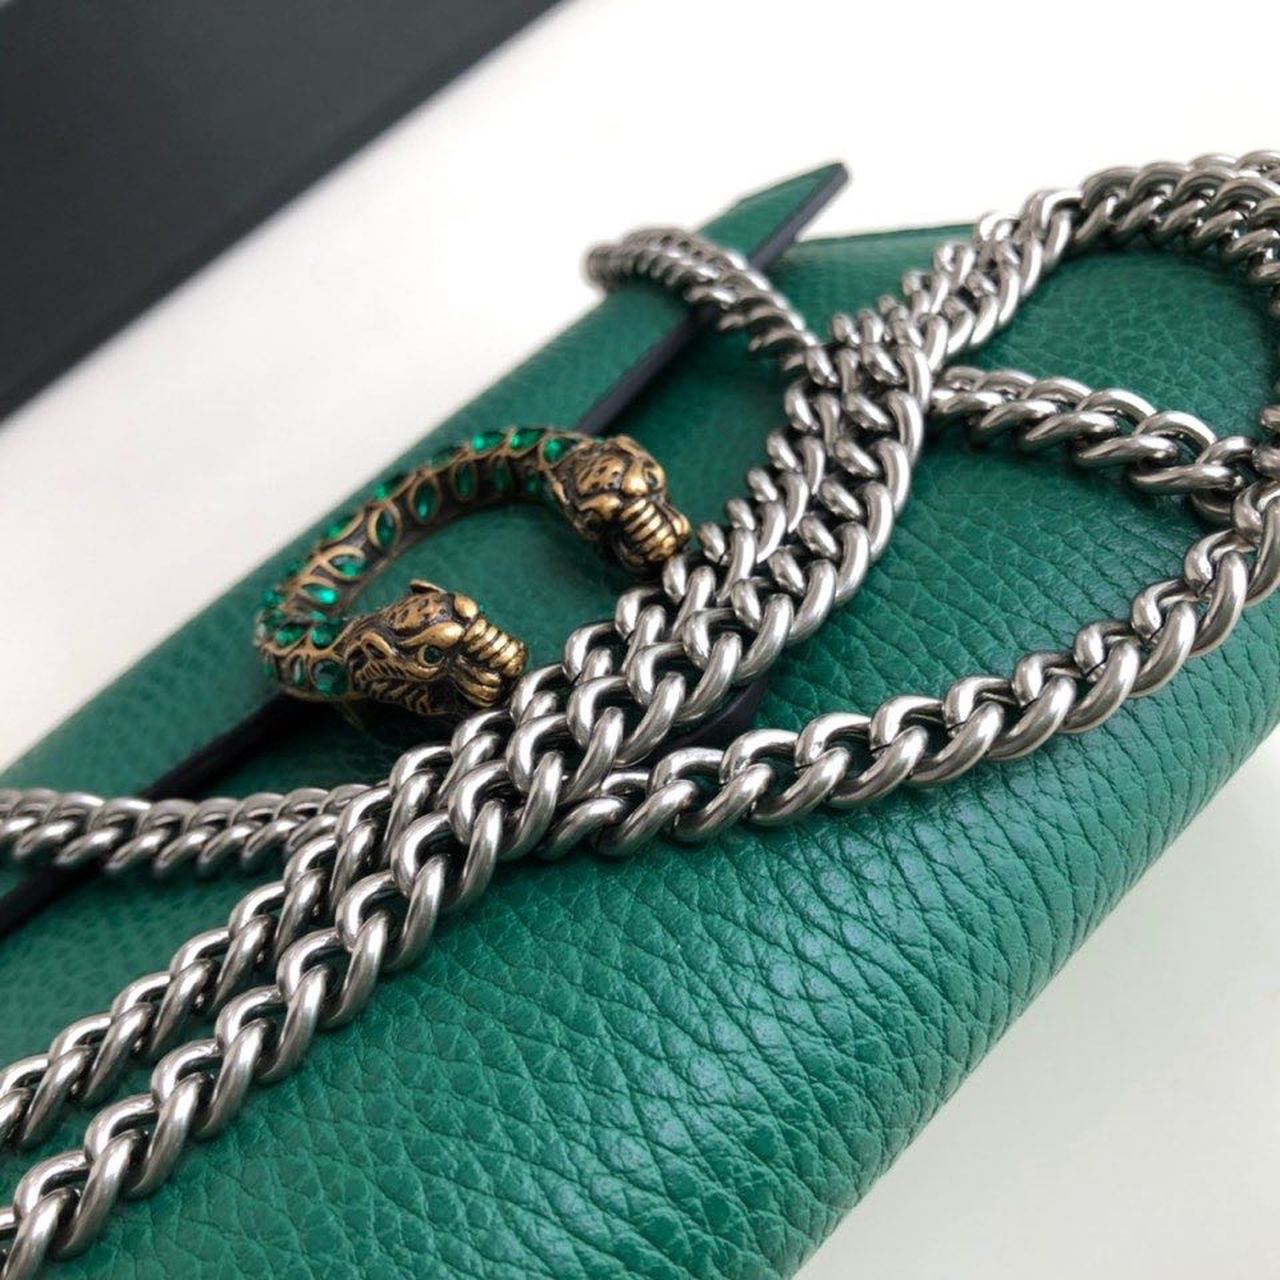 gg Dionysus Mini Chain Bag Emerald Green Metal-Free Tanned For Women 8in/20cm gg 401231 CAOGX 3120